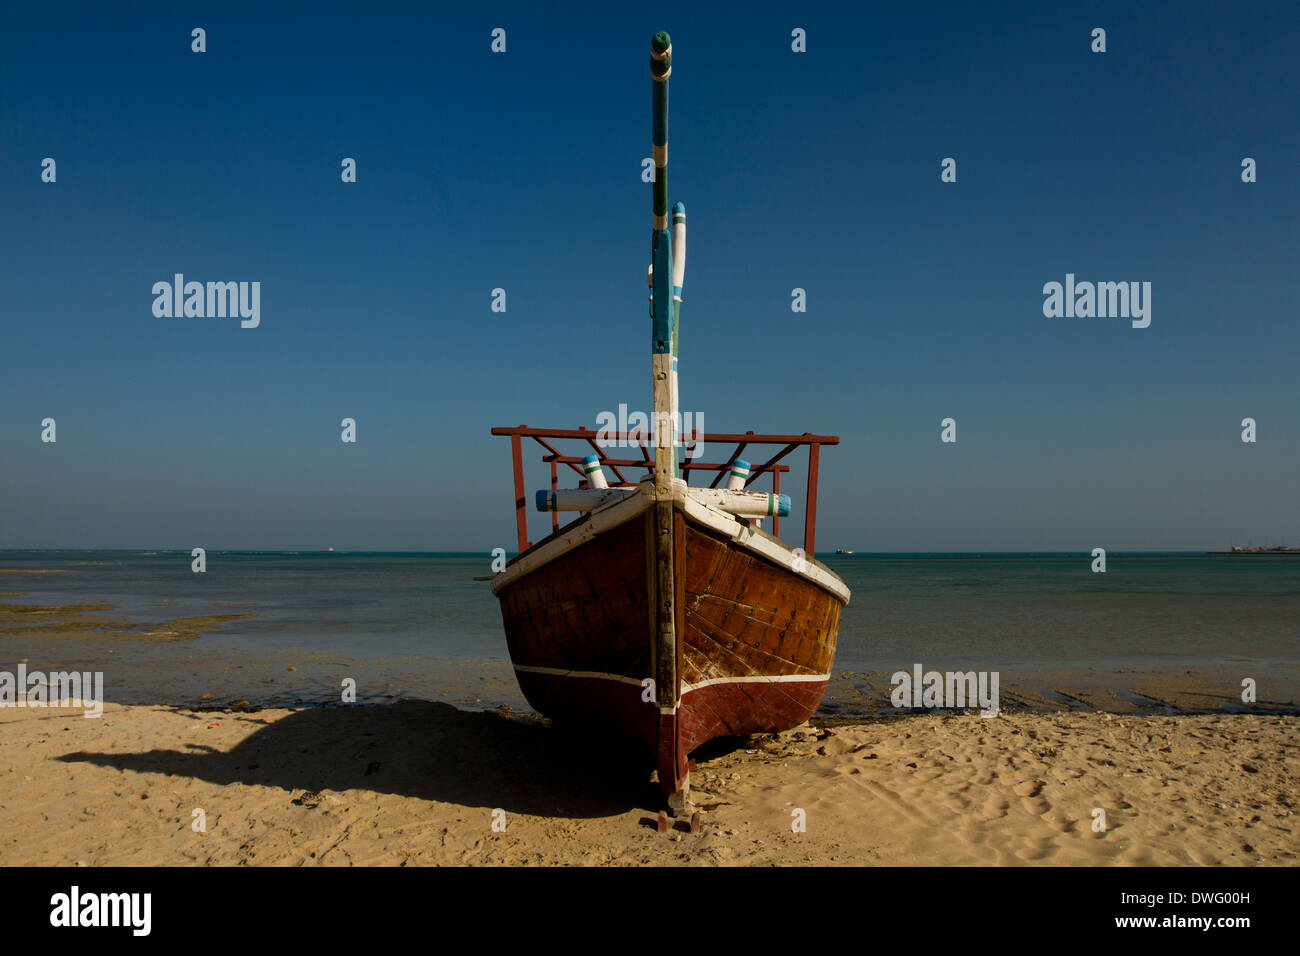 Beached traditional dhow boat and beach in Al Wakra, Qatar Stock Photo